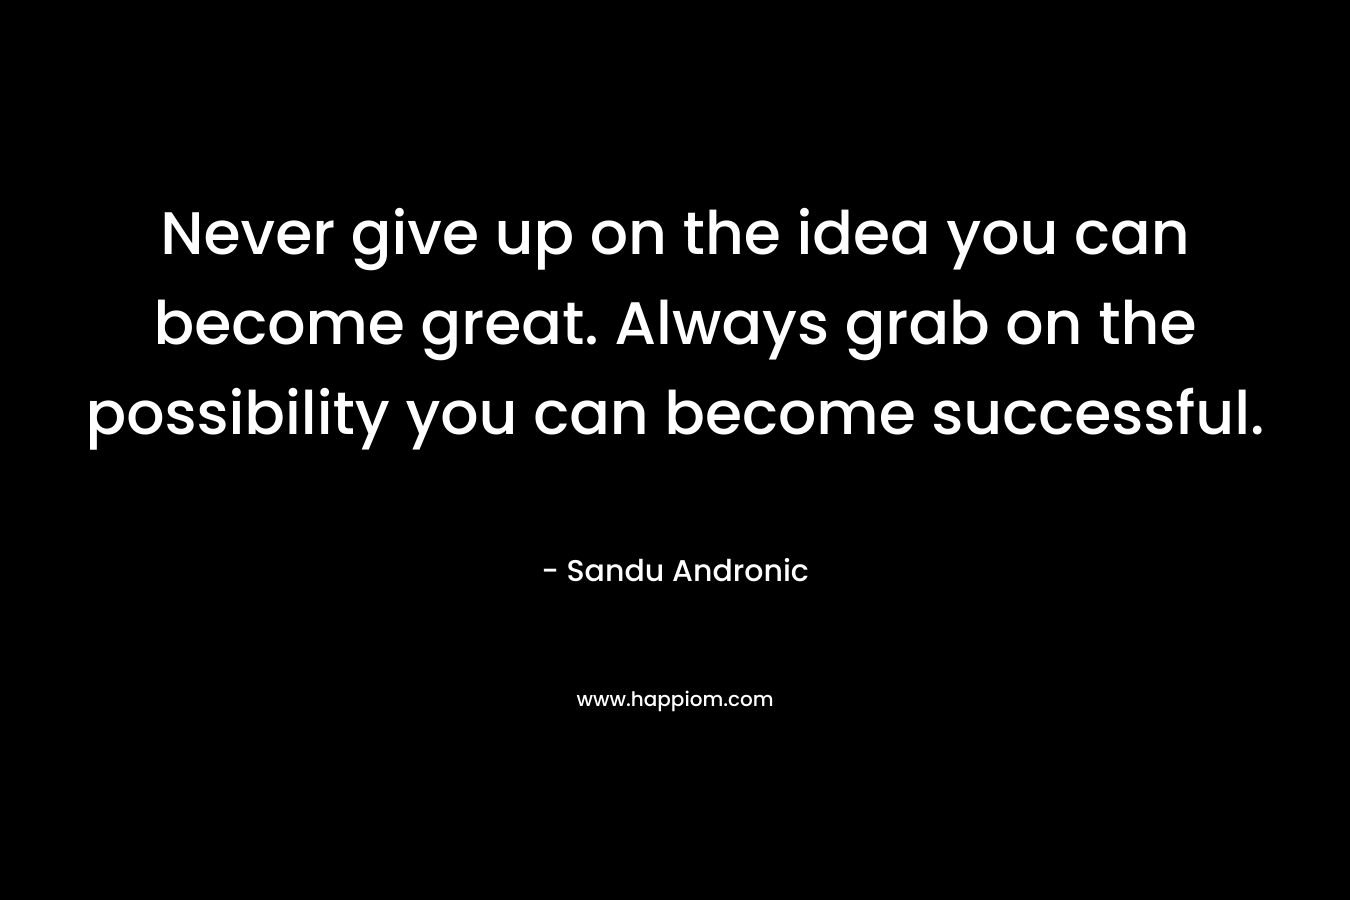 Never give up on the idea you can become great. Always grab on the possibility you can become successful.